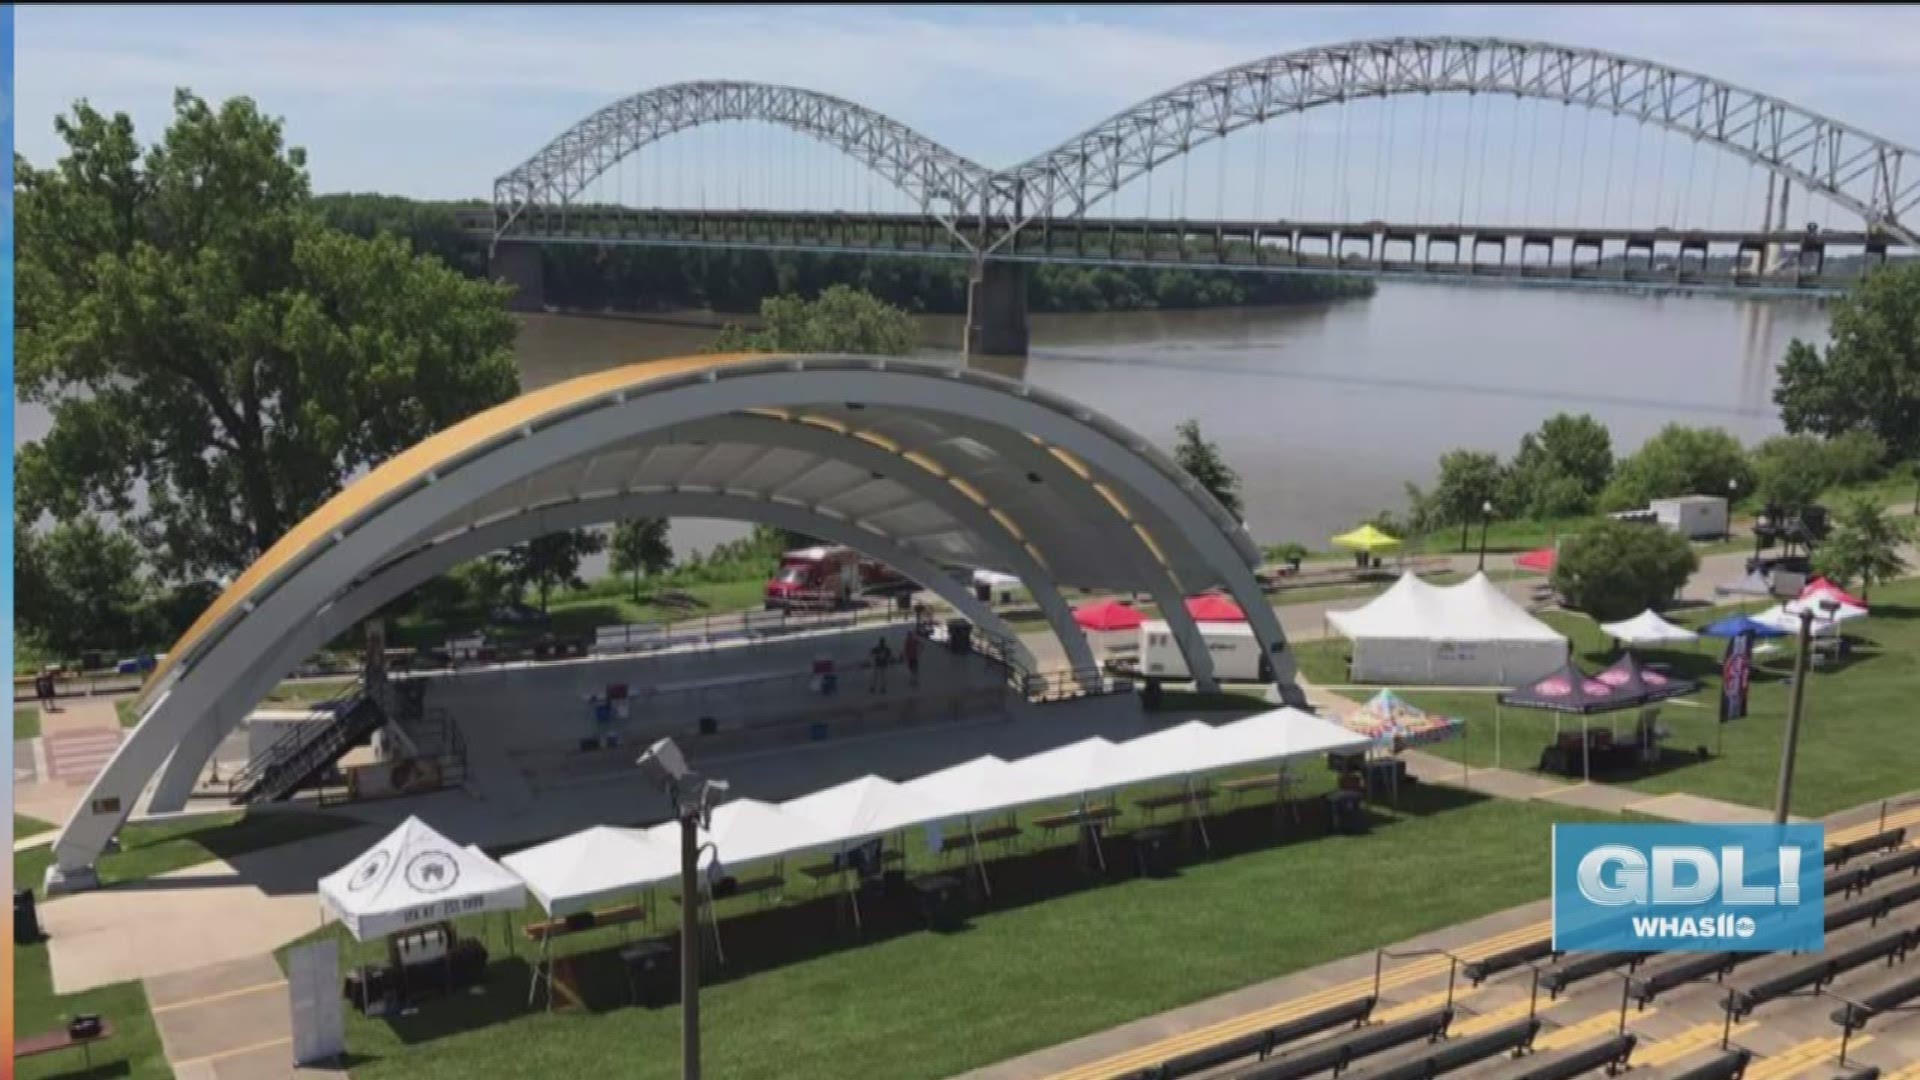 Fest of Ale is Saturday, June 1 from 3-7 PM at the New Albany Riverfront Amphitheater on Water Street, with an after-party at Hull and Highwater on Main Street. Advance tickets start at $40 and are $55 at the gate if not sold out.